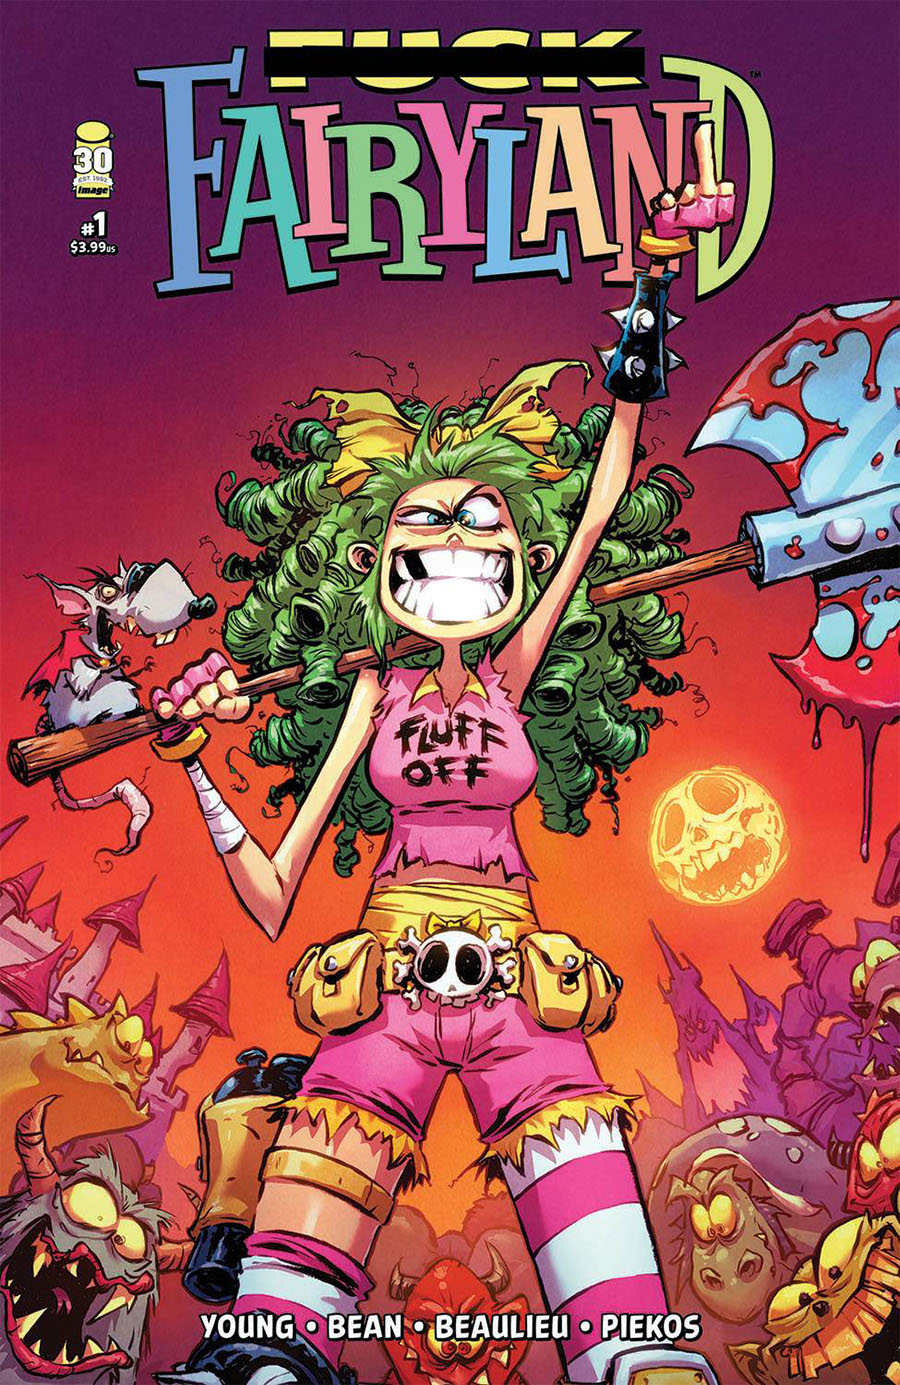 I Hate Fairyland Vol 2 #1 Cover B Variant Skottie Young Cover